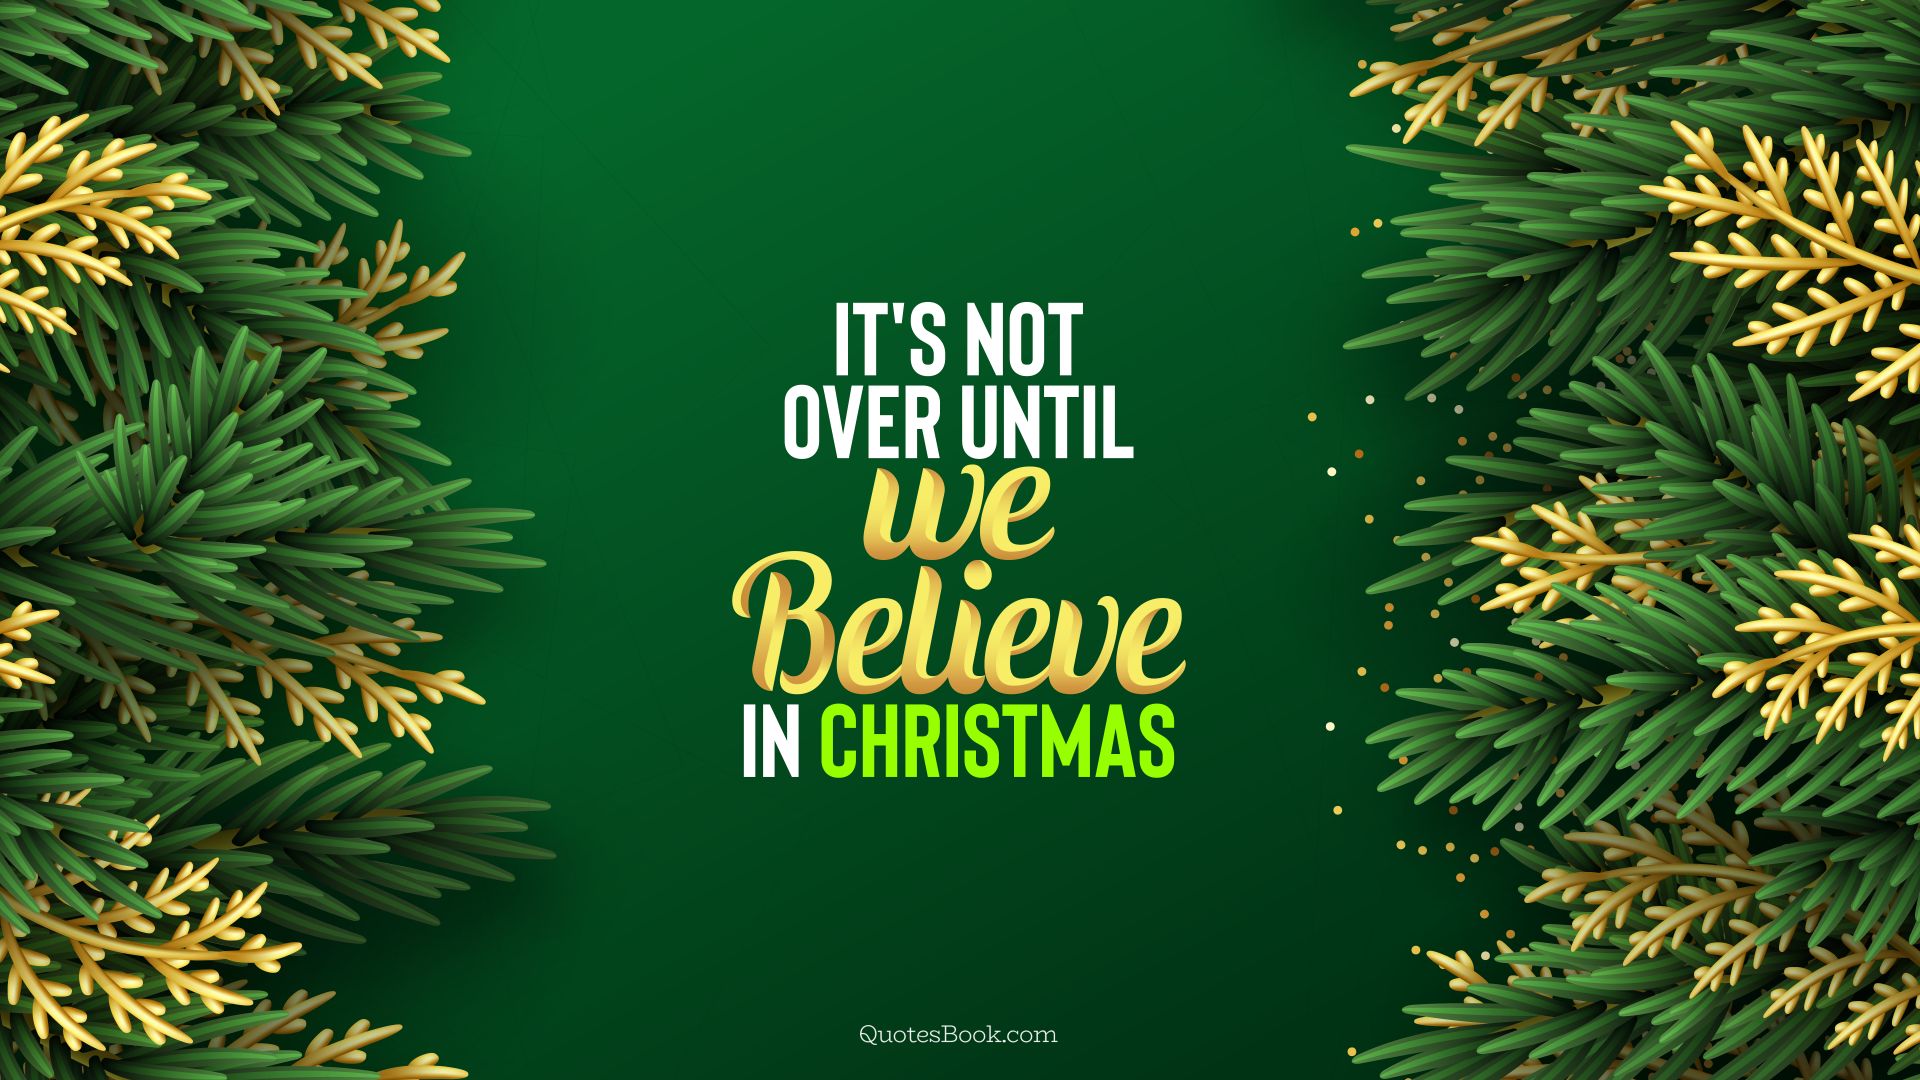 It's not over until we believe in Christmas. - Quote by QuotesBook